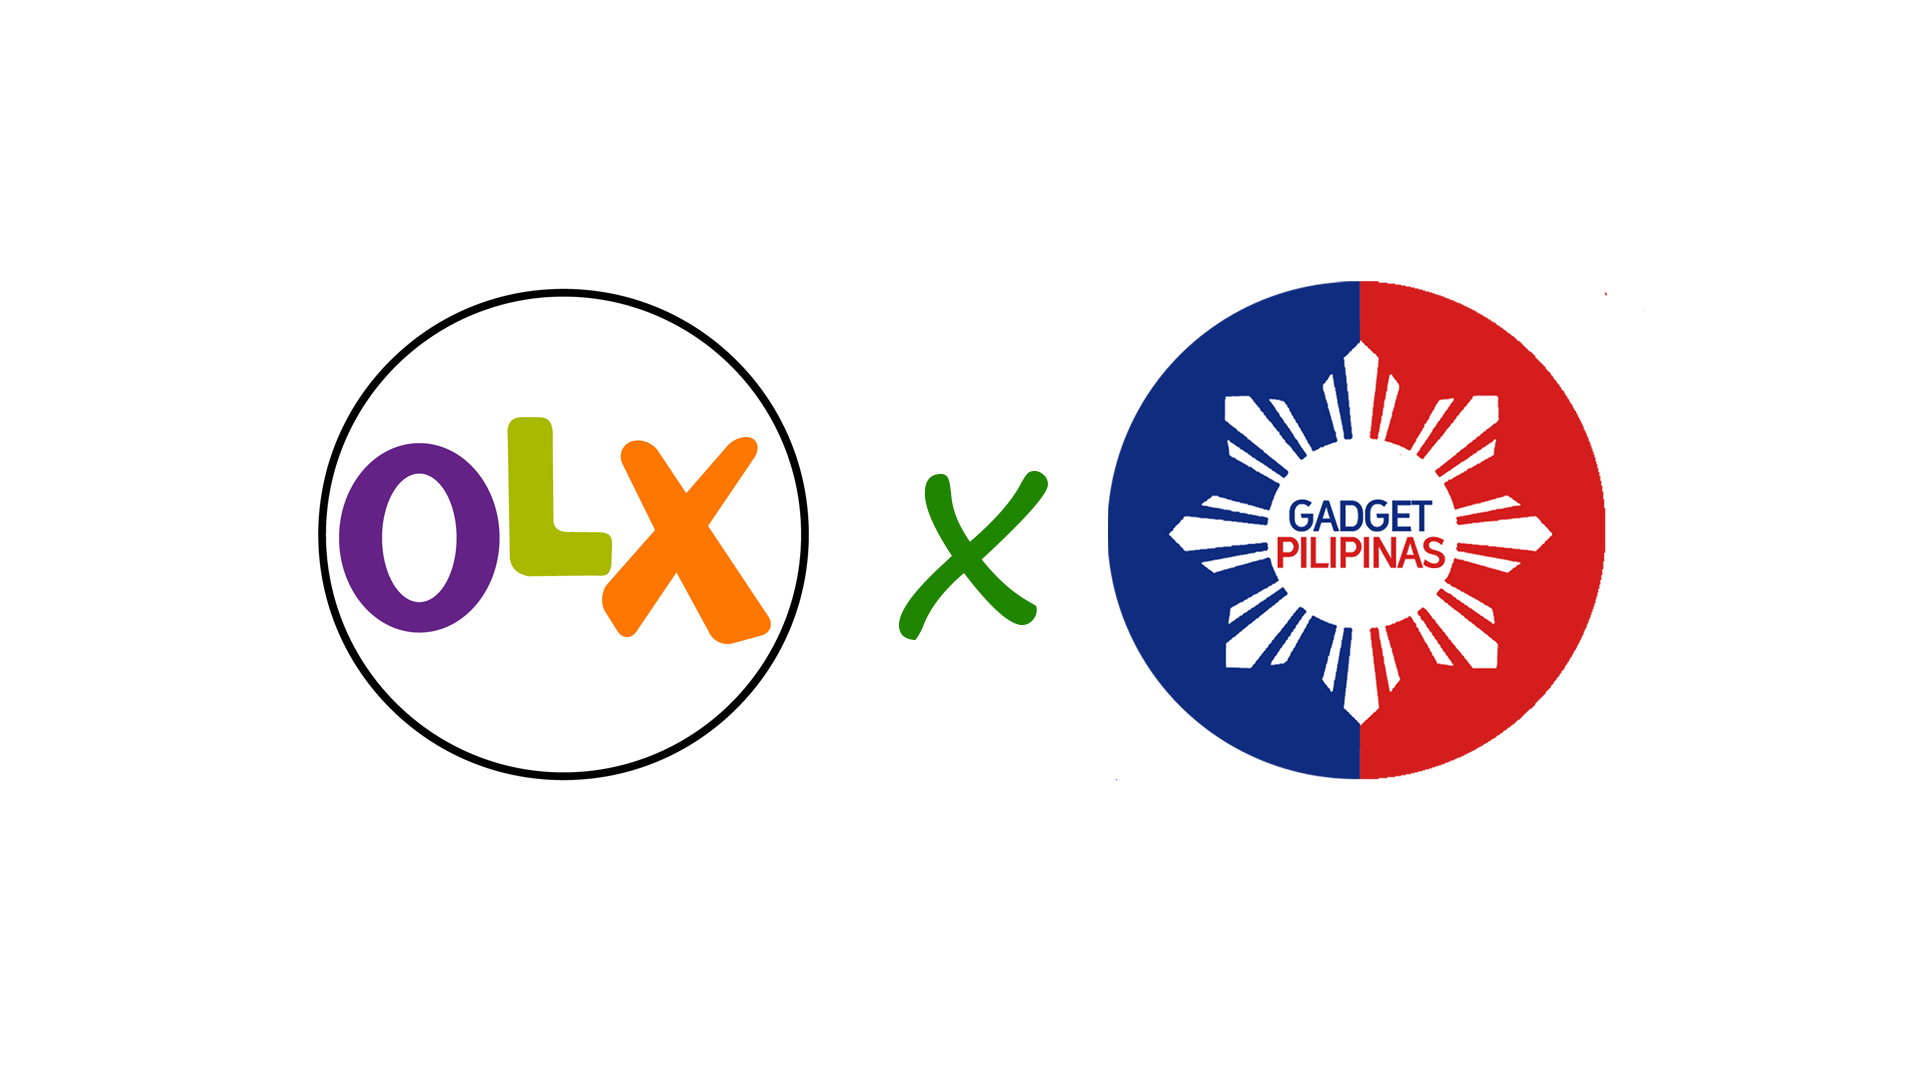 OLX and Gadget Pilipinas enter limited time partnership